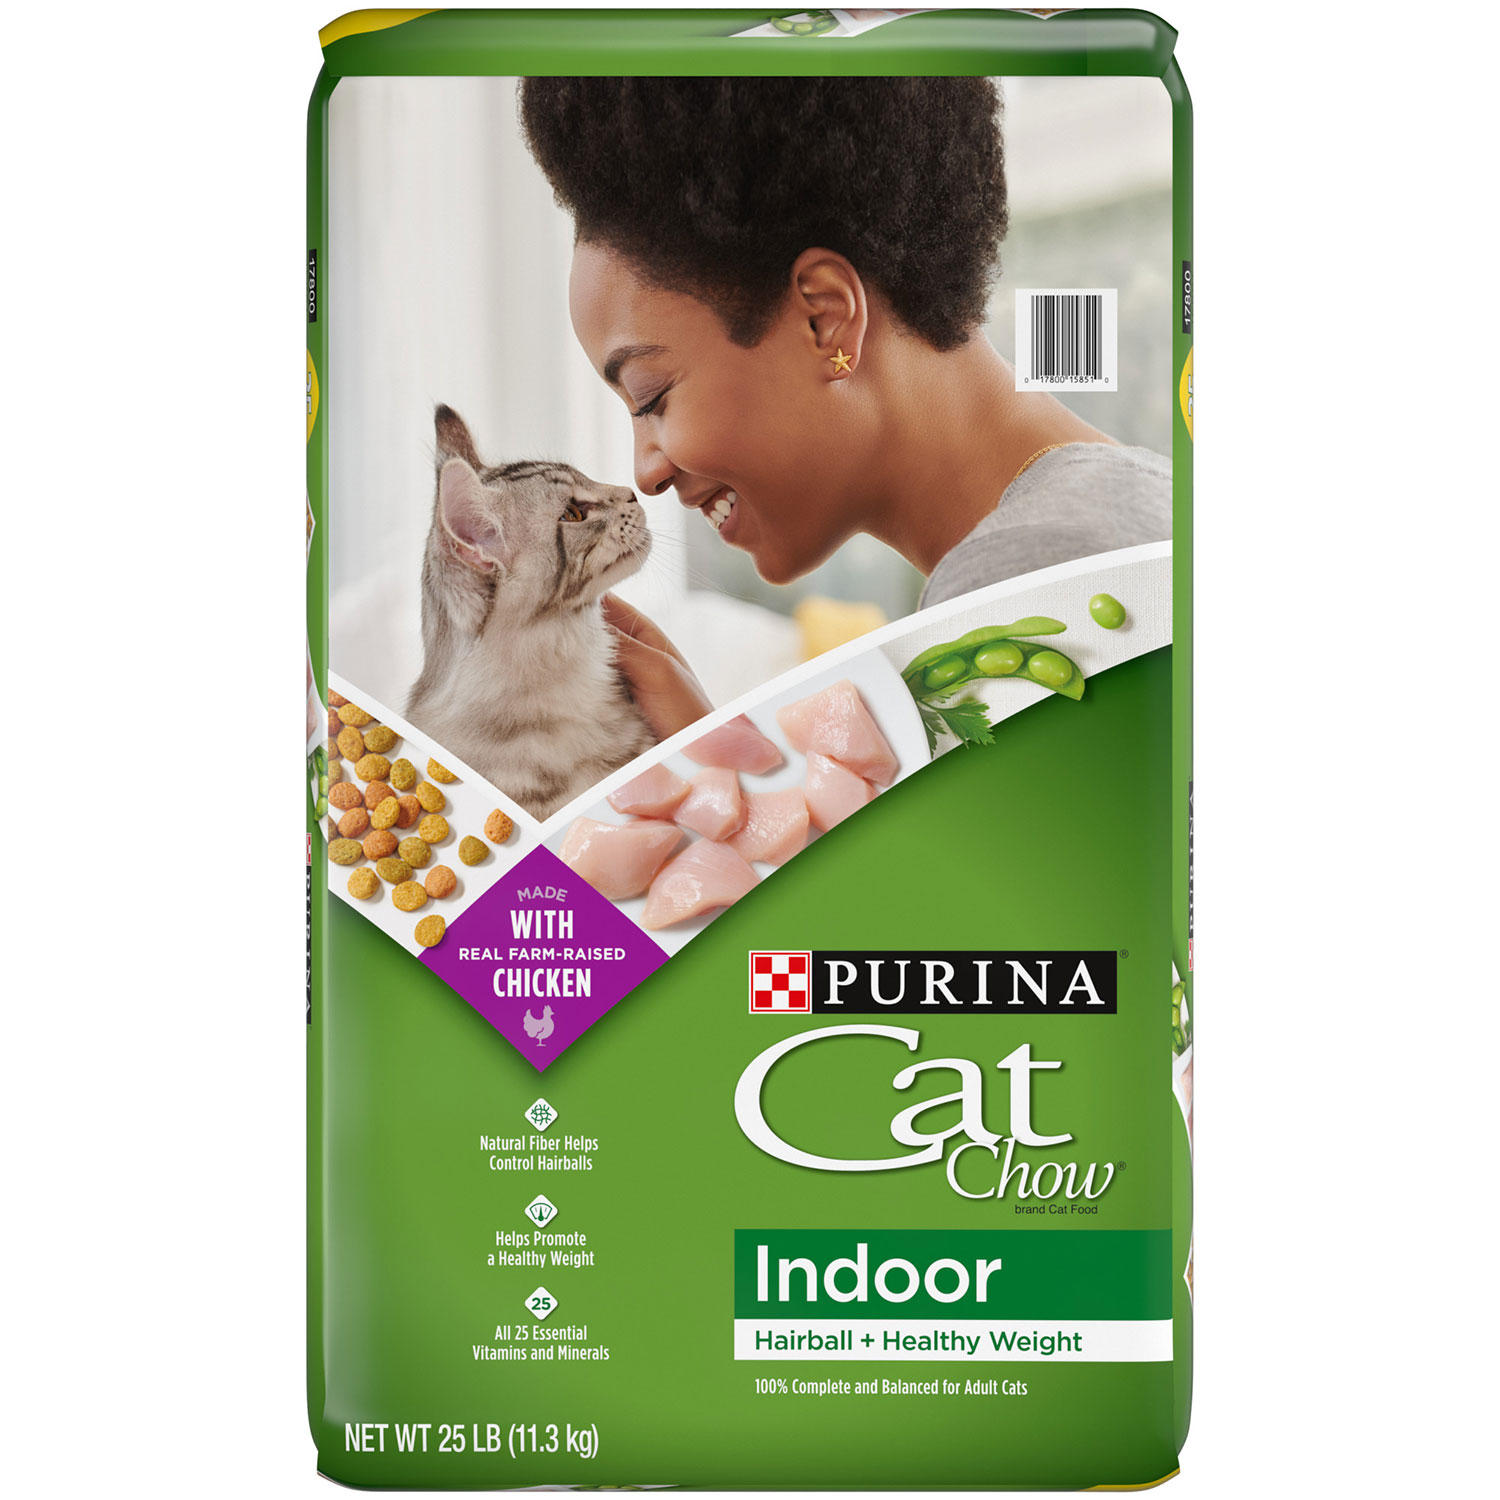 Purina Cat Chow Indoor Dry Cat Food, Hairball + Healthy Weight (25 lbs.)